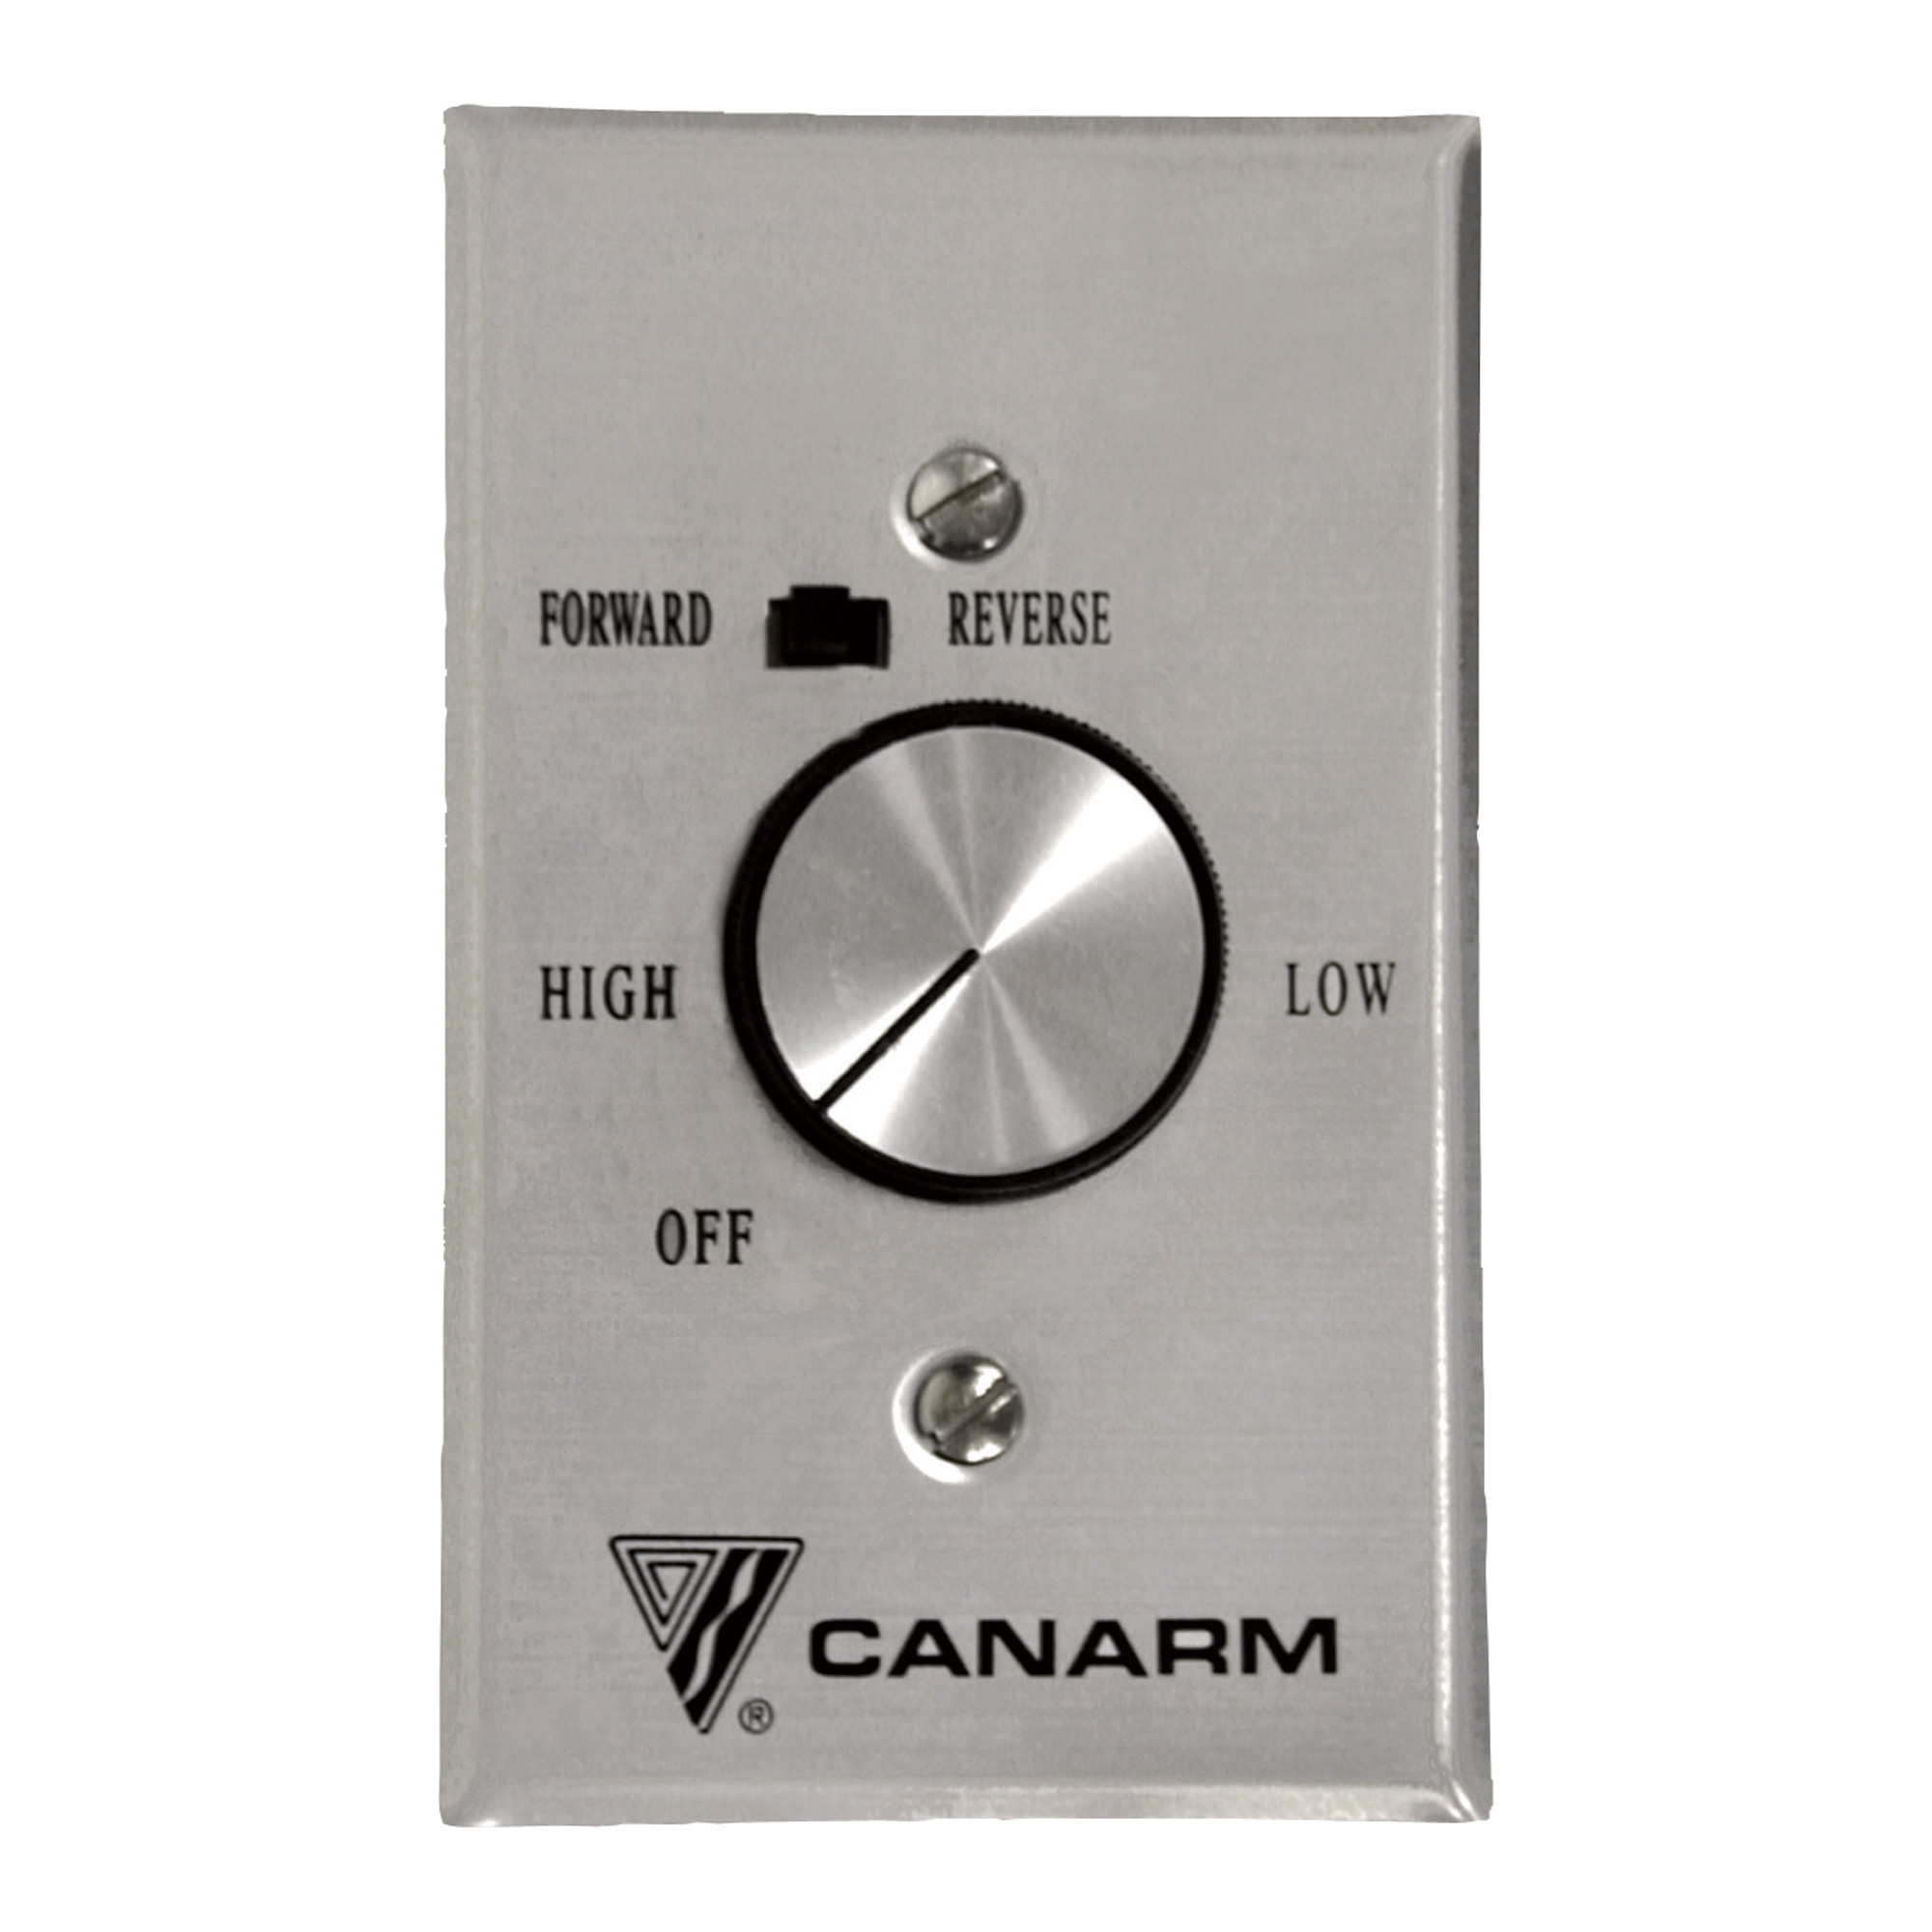 Canarm Speed Control for 4 Ceiling Fans, Model CNFRMC5